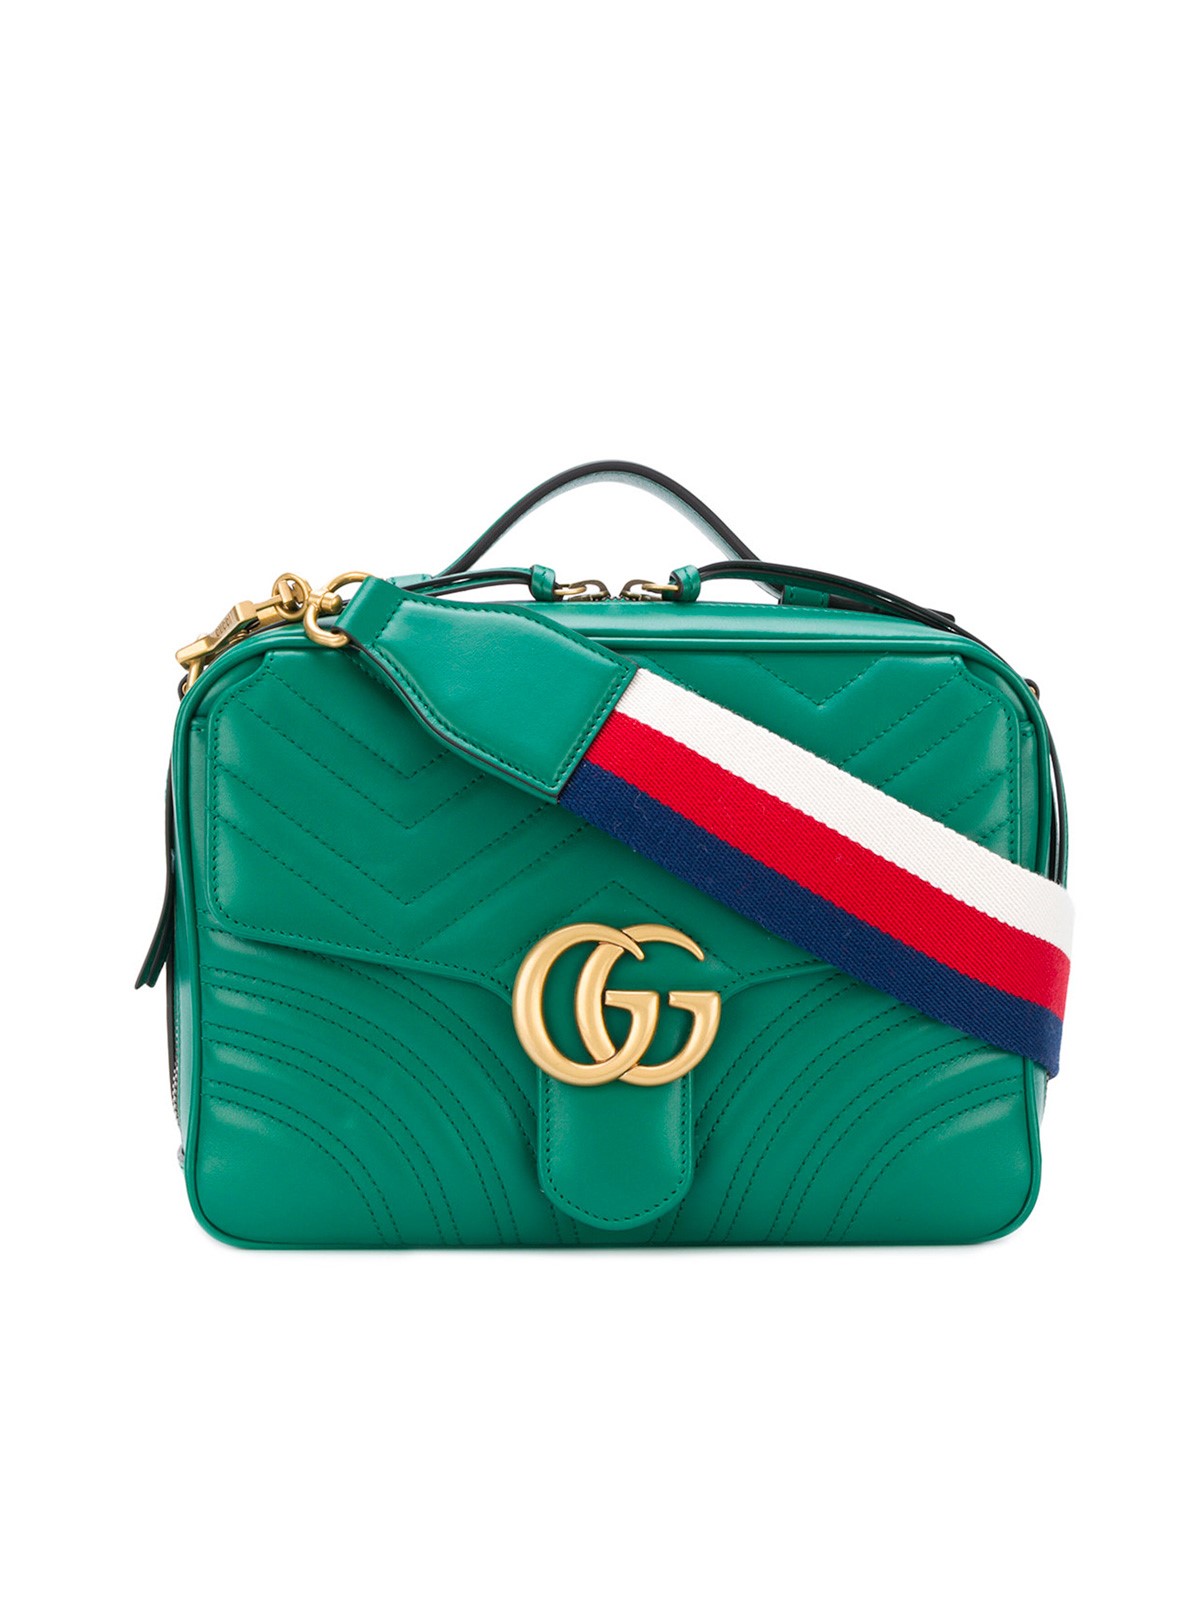 gucci GG MARMONT SHOULDER BAG available on www.paulmartinsmith.com - 21477